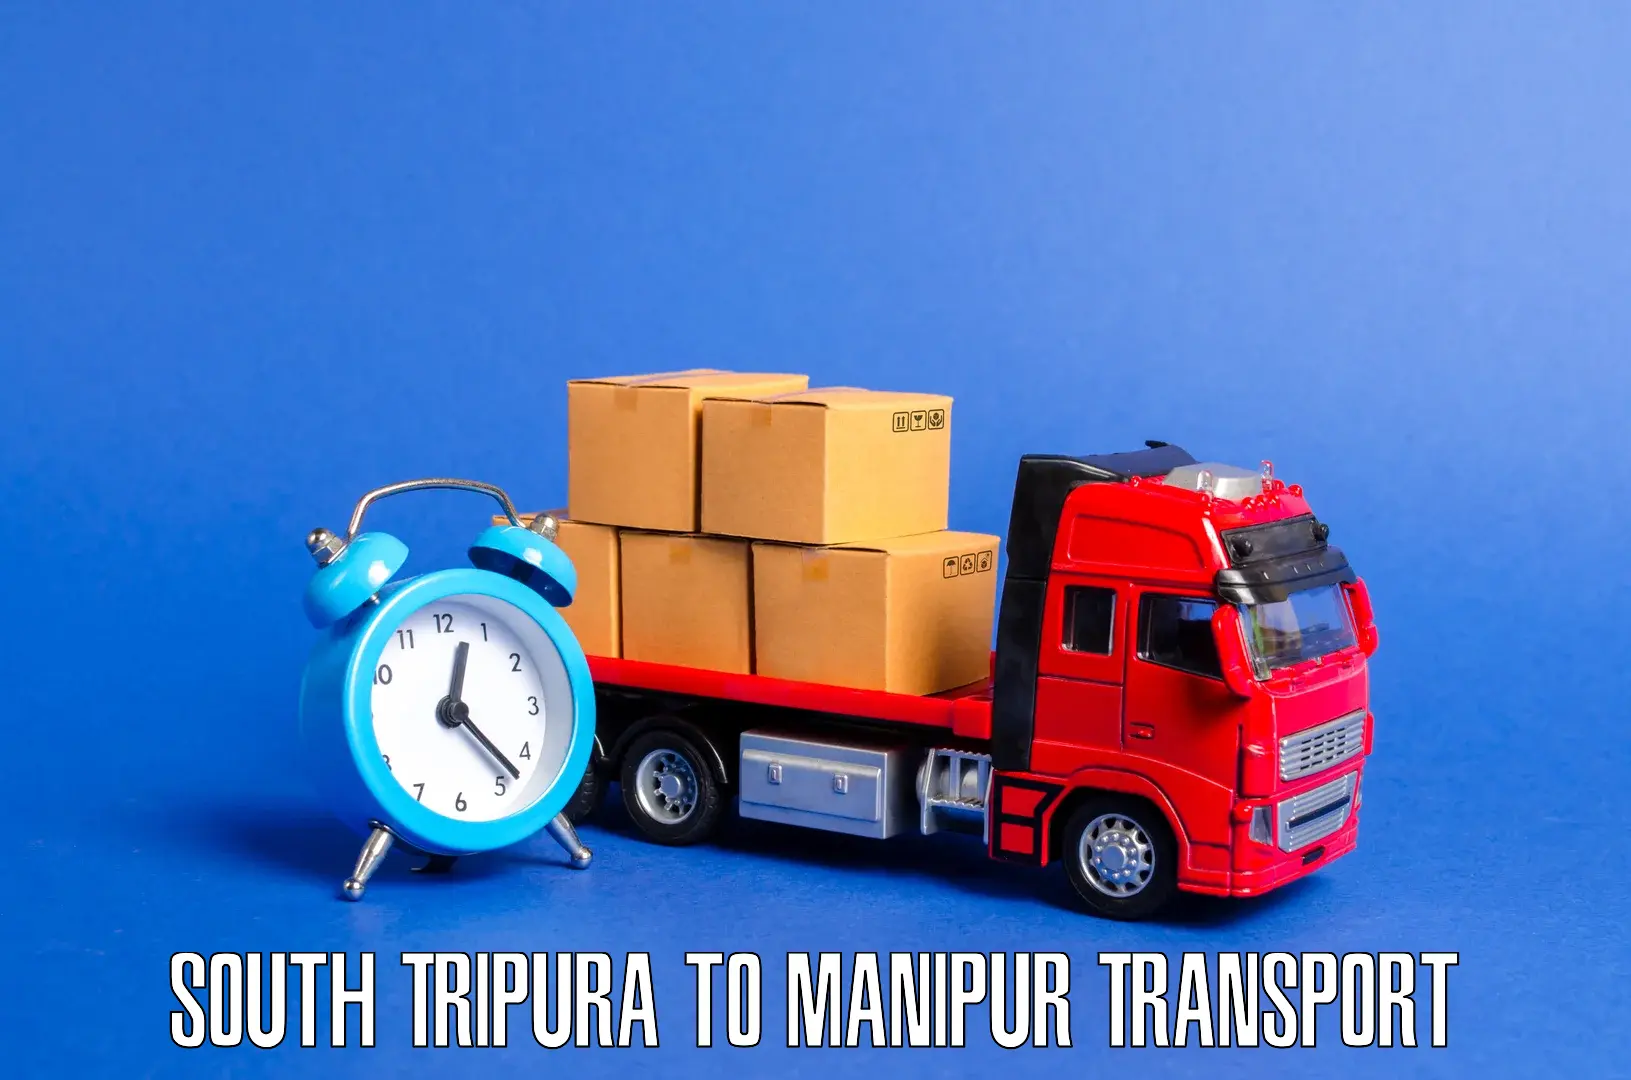 Air cargo transport services South Tripura to Imphal